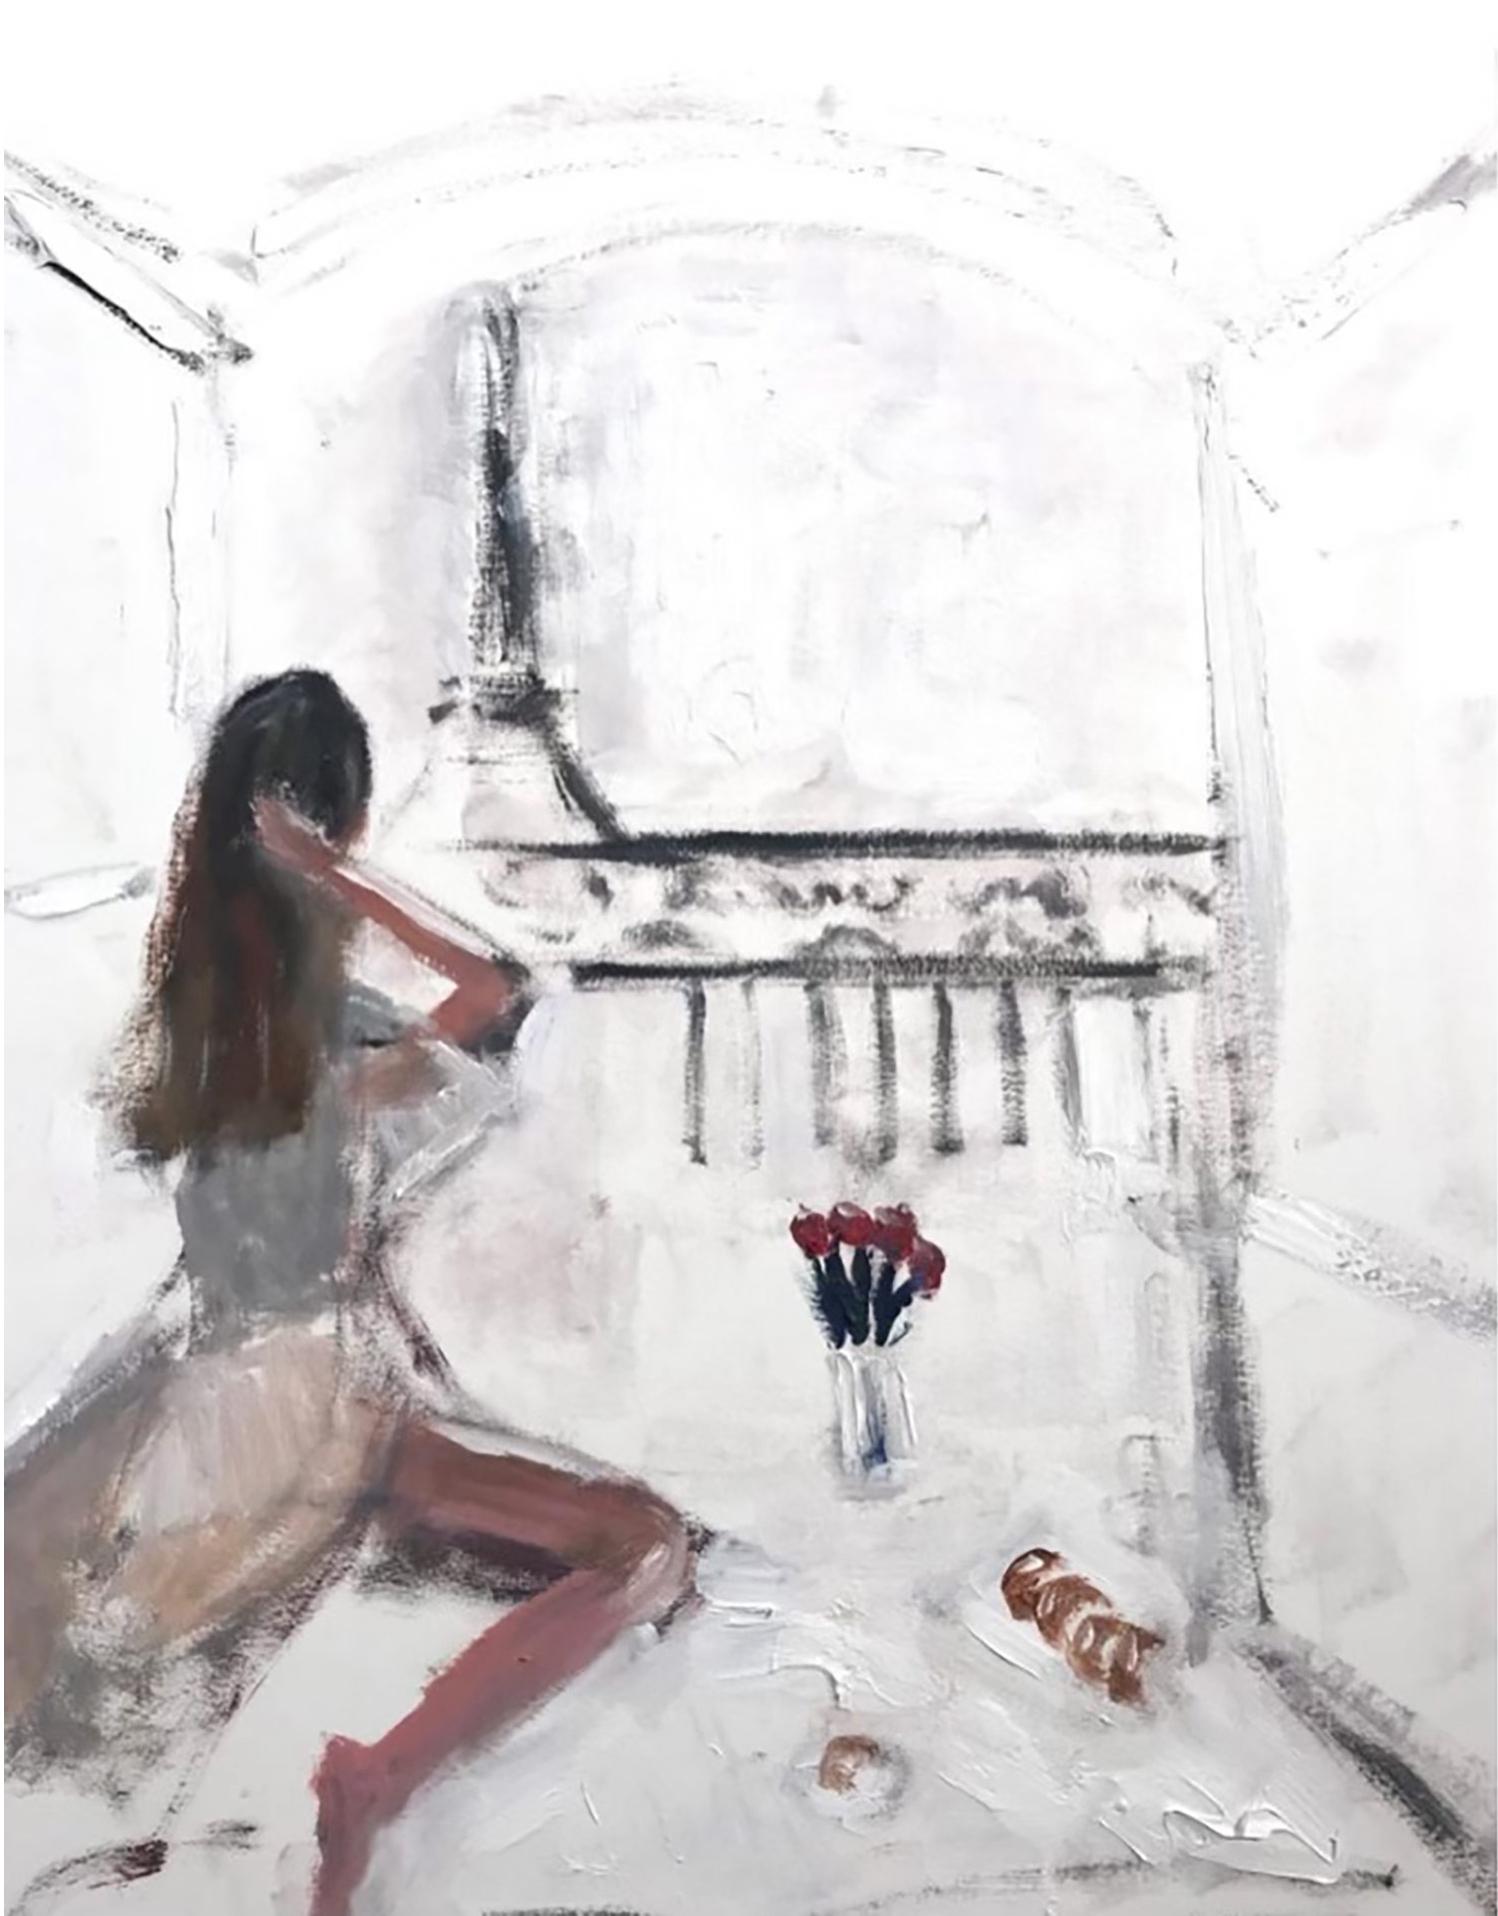 Cindy Shaoul Abstract Painting - "Paris is For Lovers" Figure in Paris by the Eiffel Tower Oil Painting on Paper 